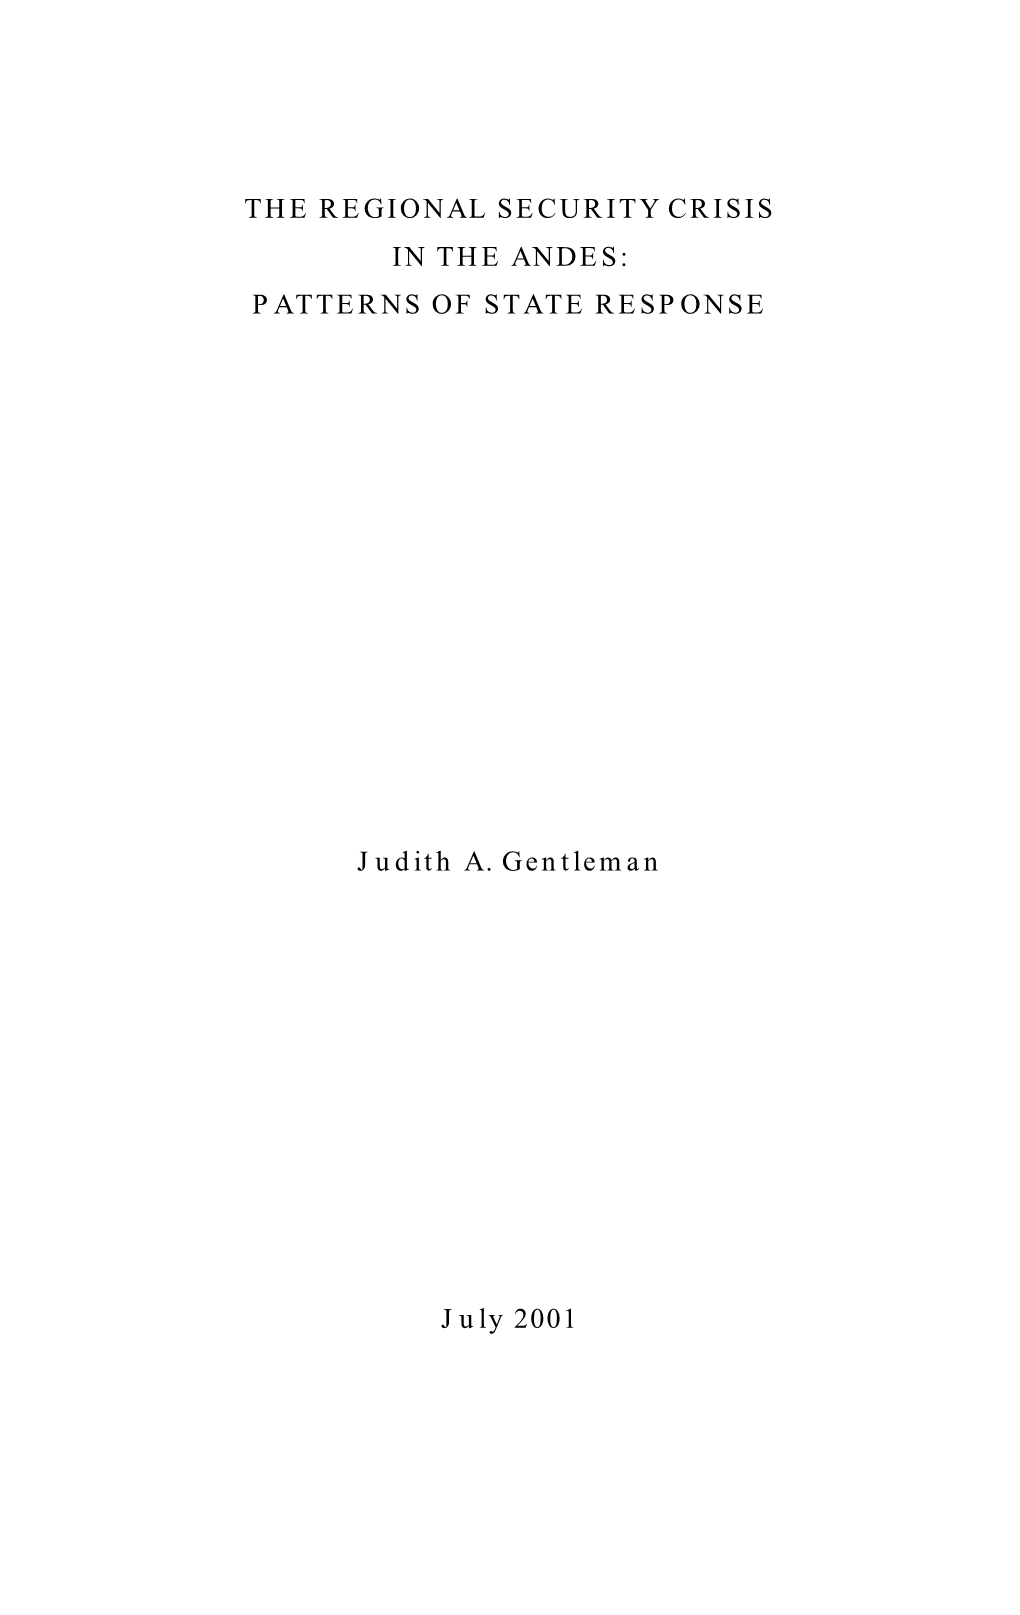 The Regional Security Crisis in the Andes: Patterns of State Response